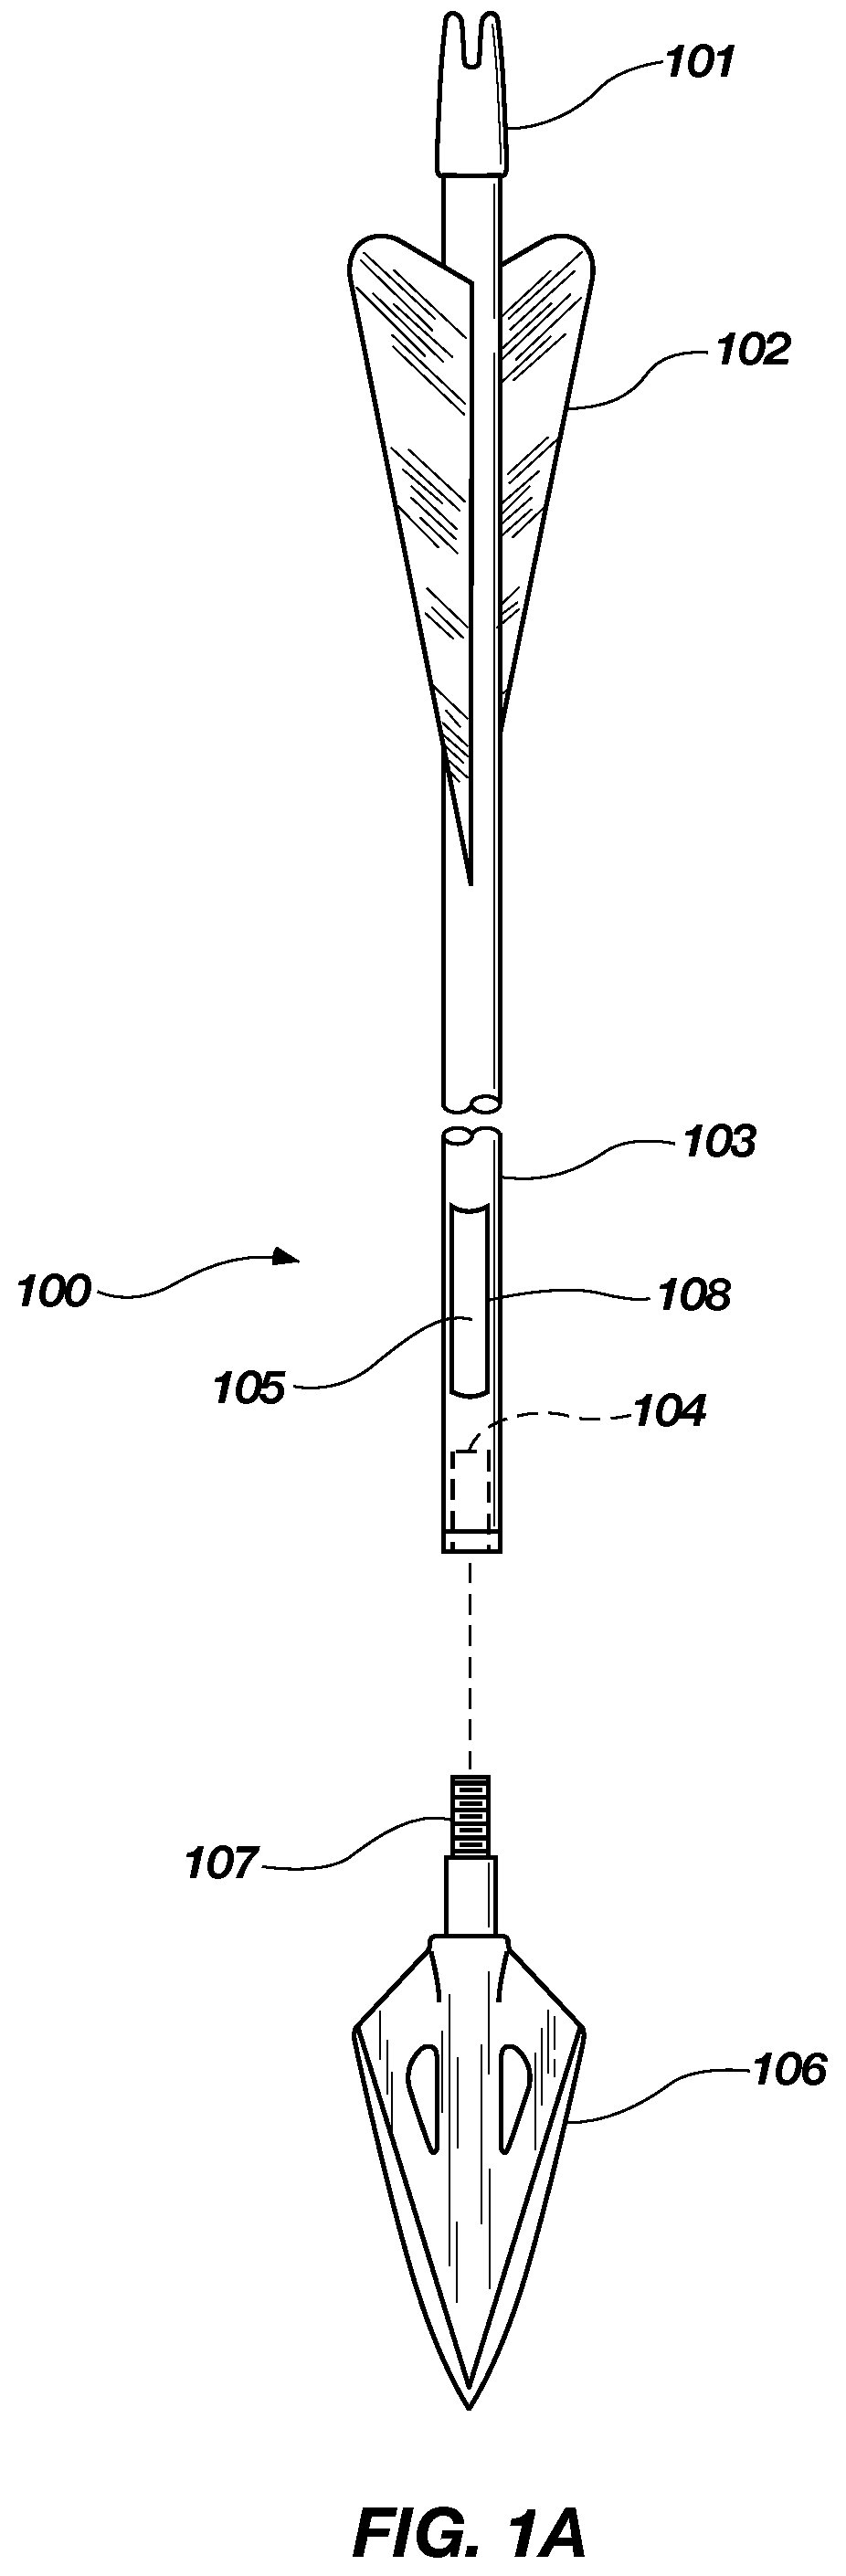 System and method for adjusting the trajectory of an arrow